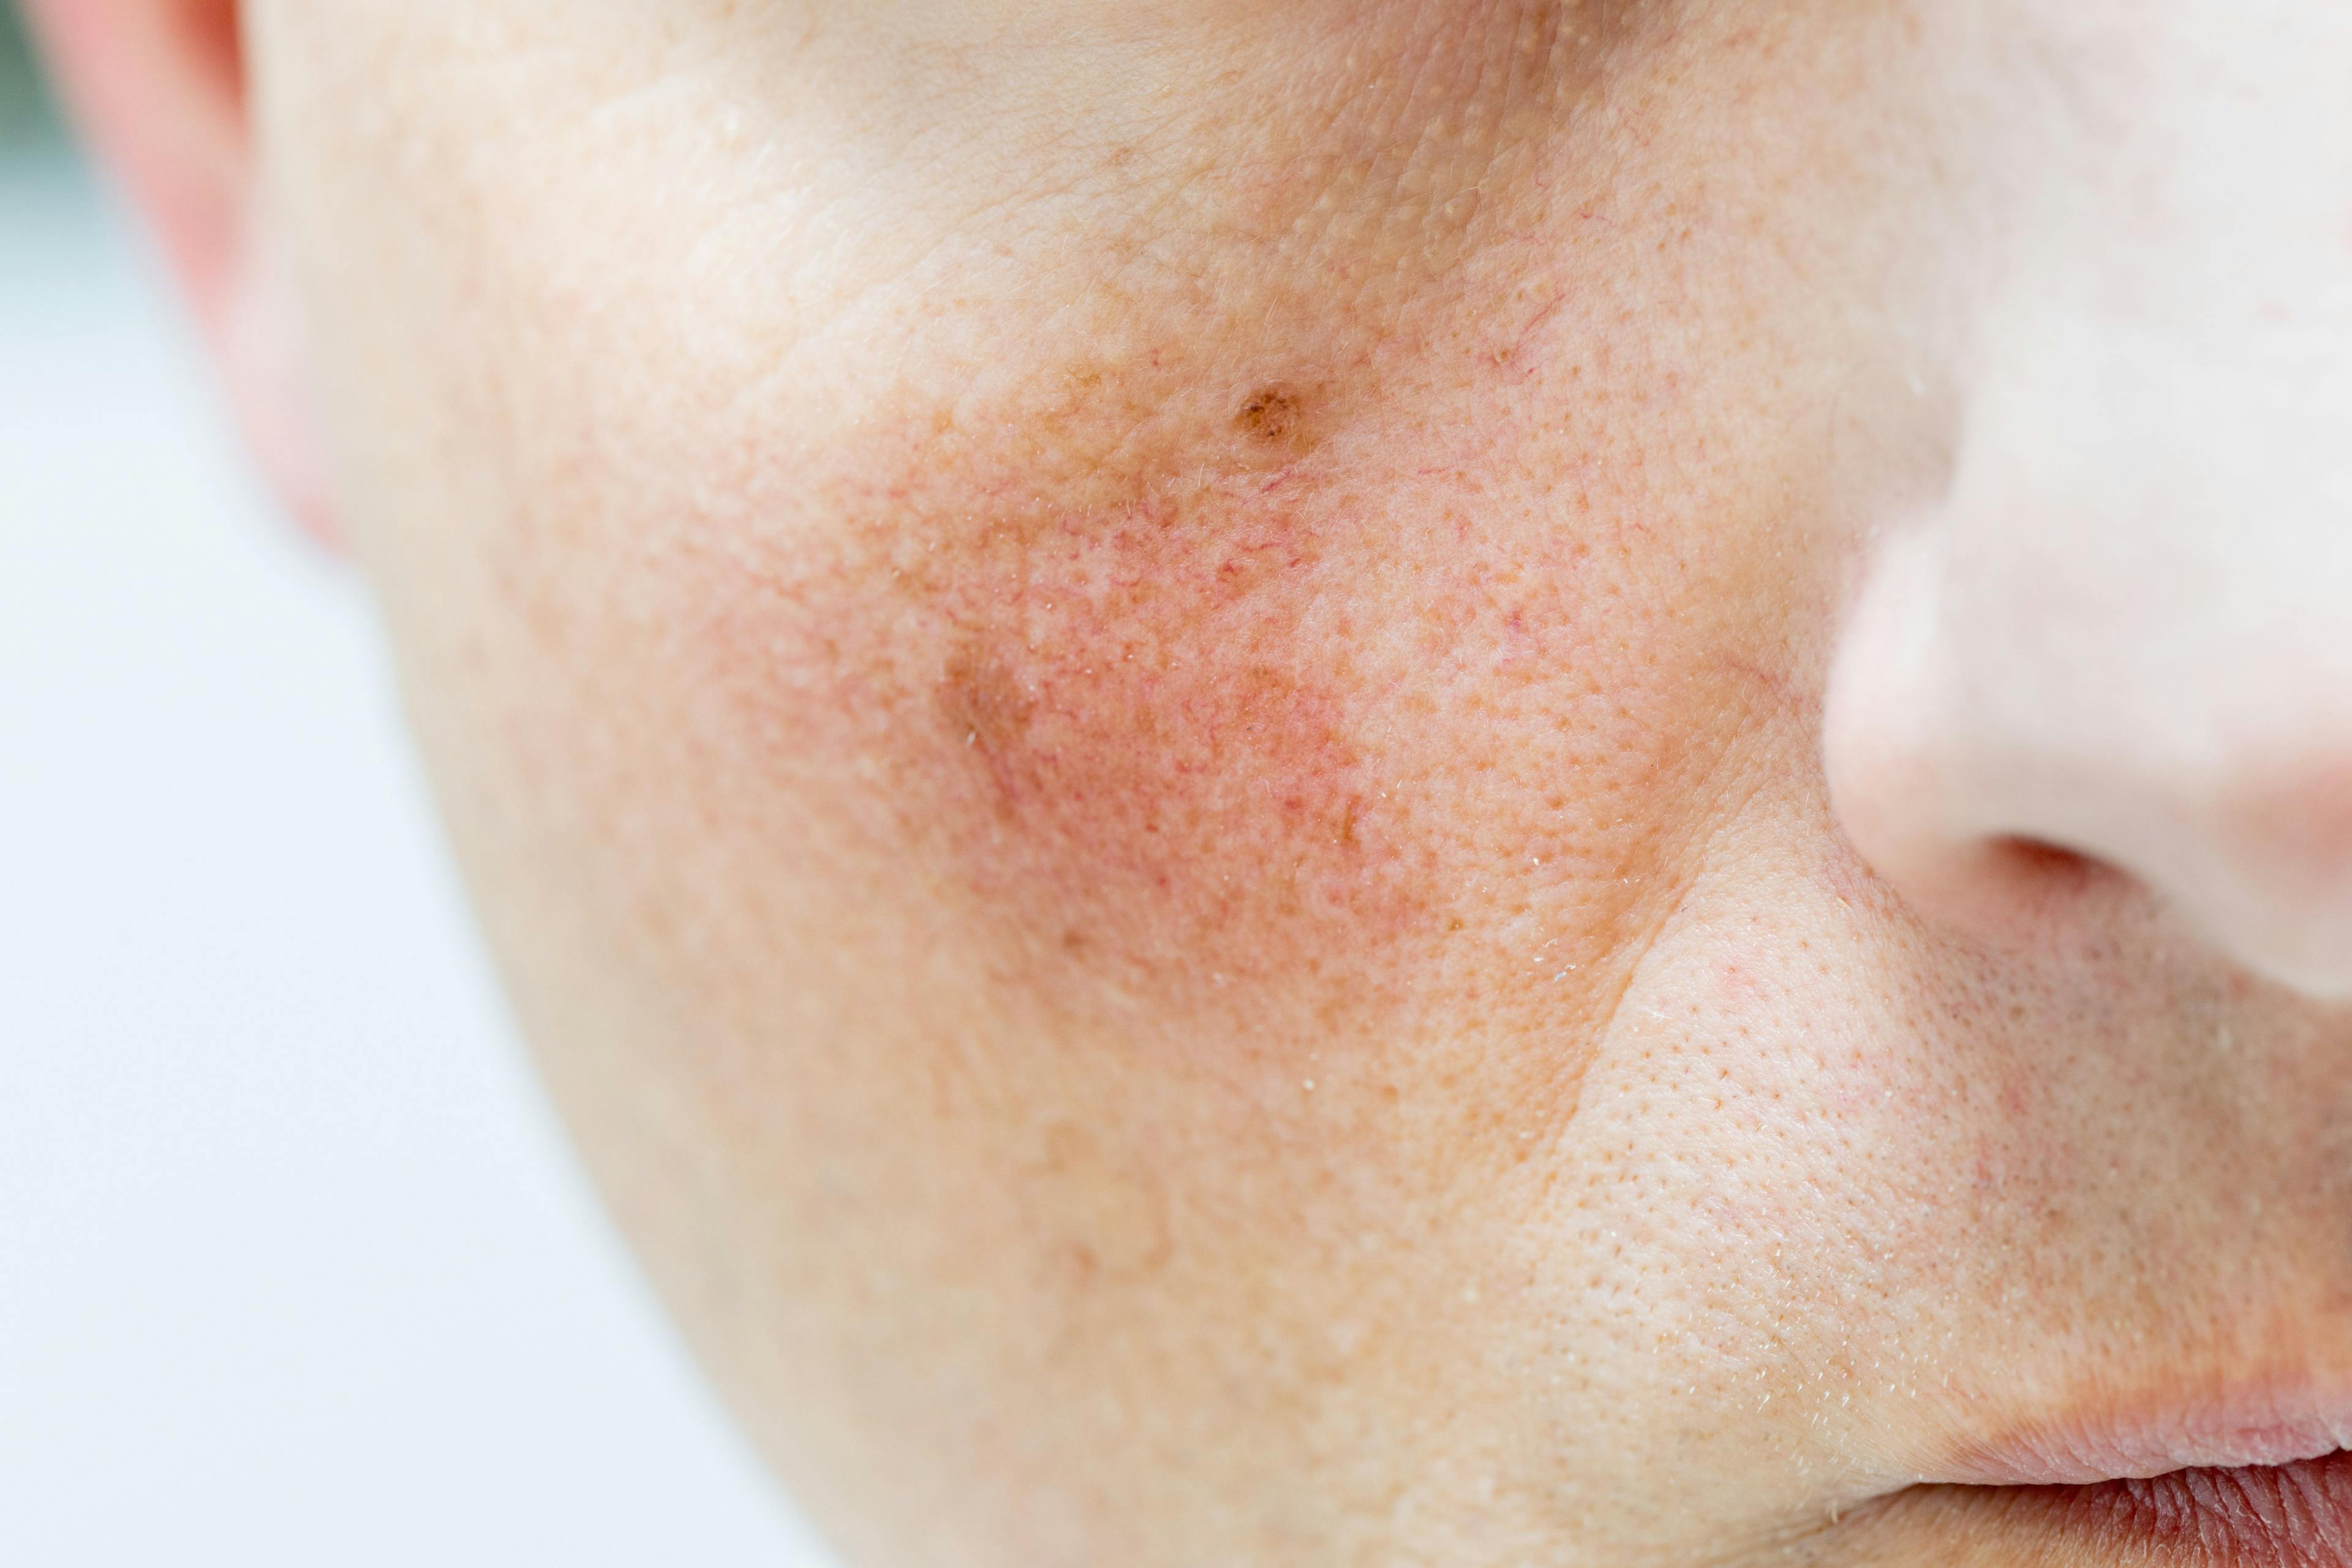 PROMs Rarely Used in Randomized Clinical Trials for Acne and Rosacea  